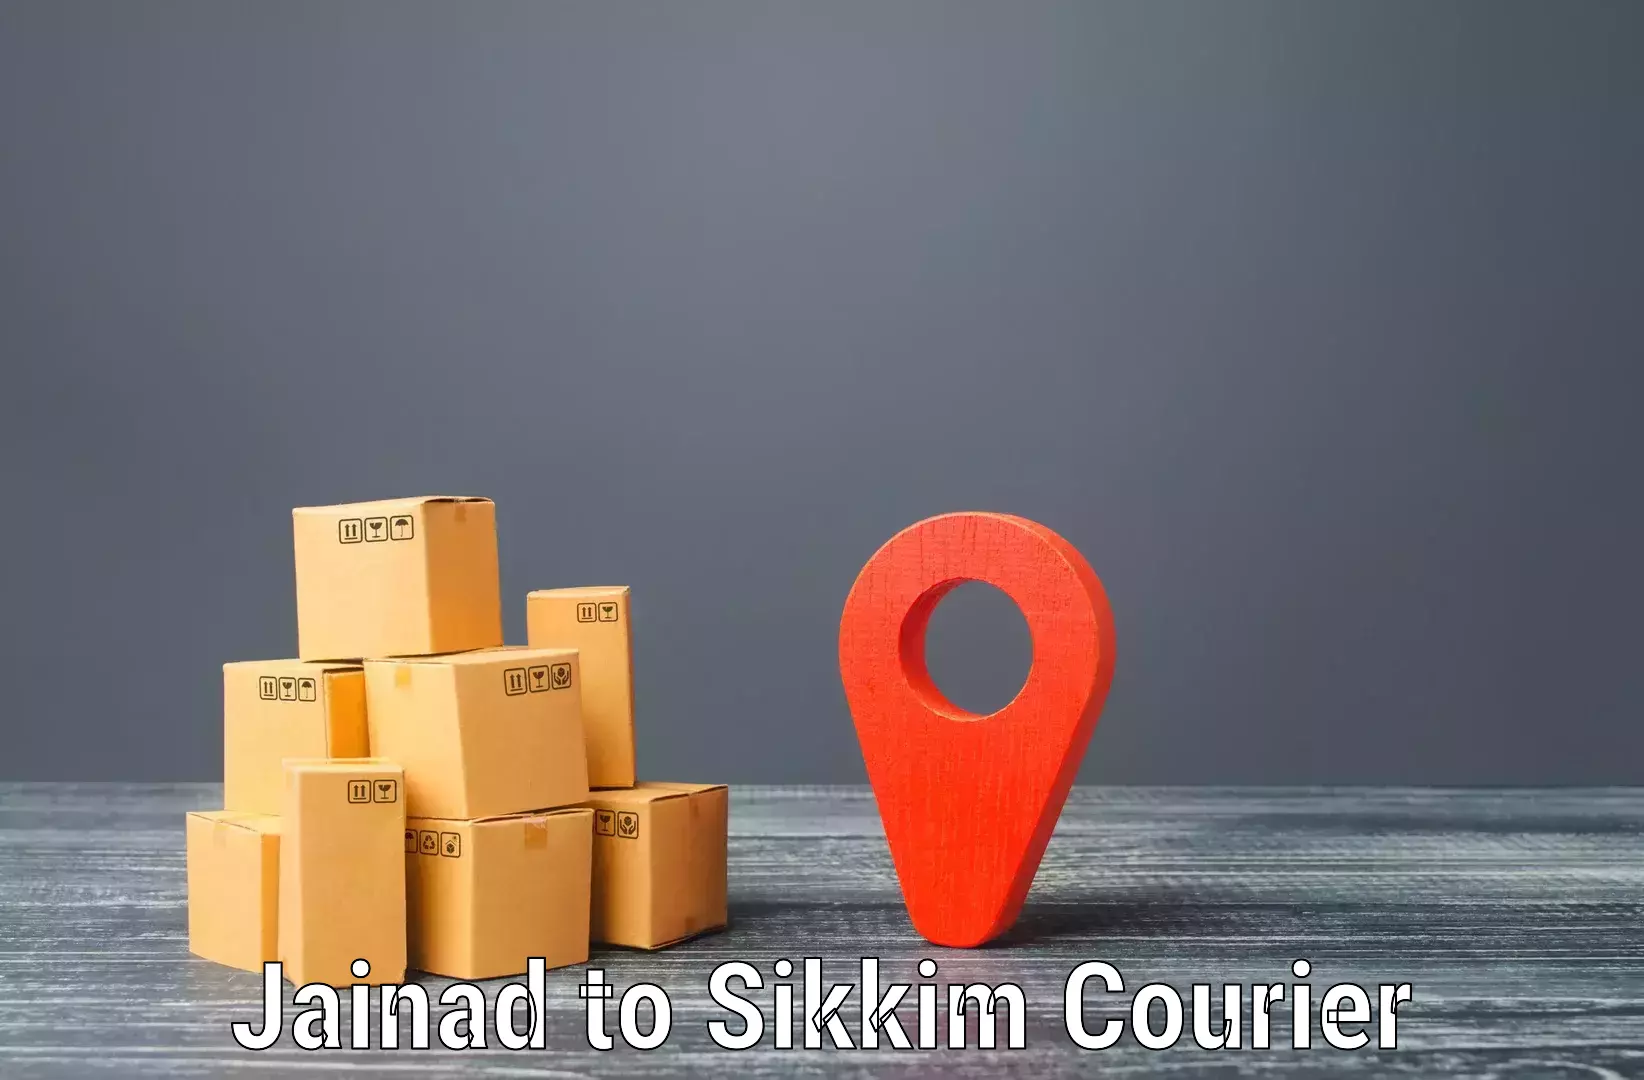 Commercial shipping rates in Jainad to Pelling